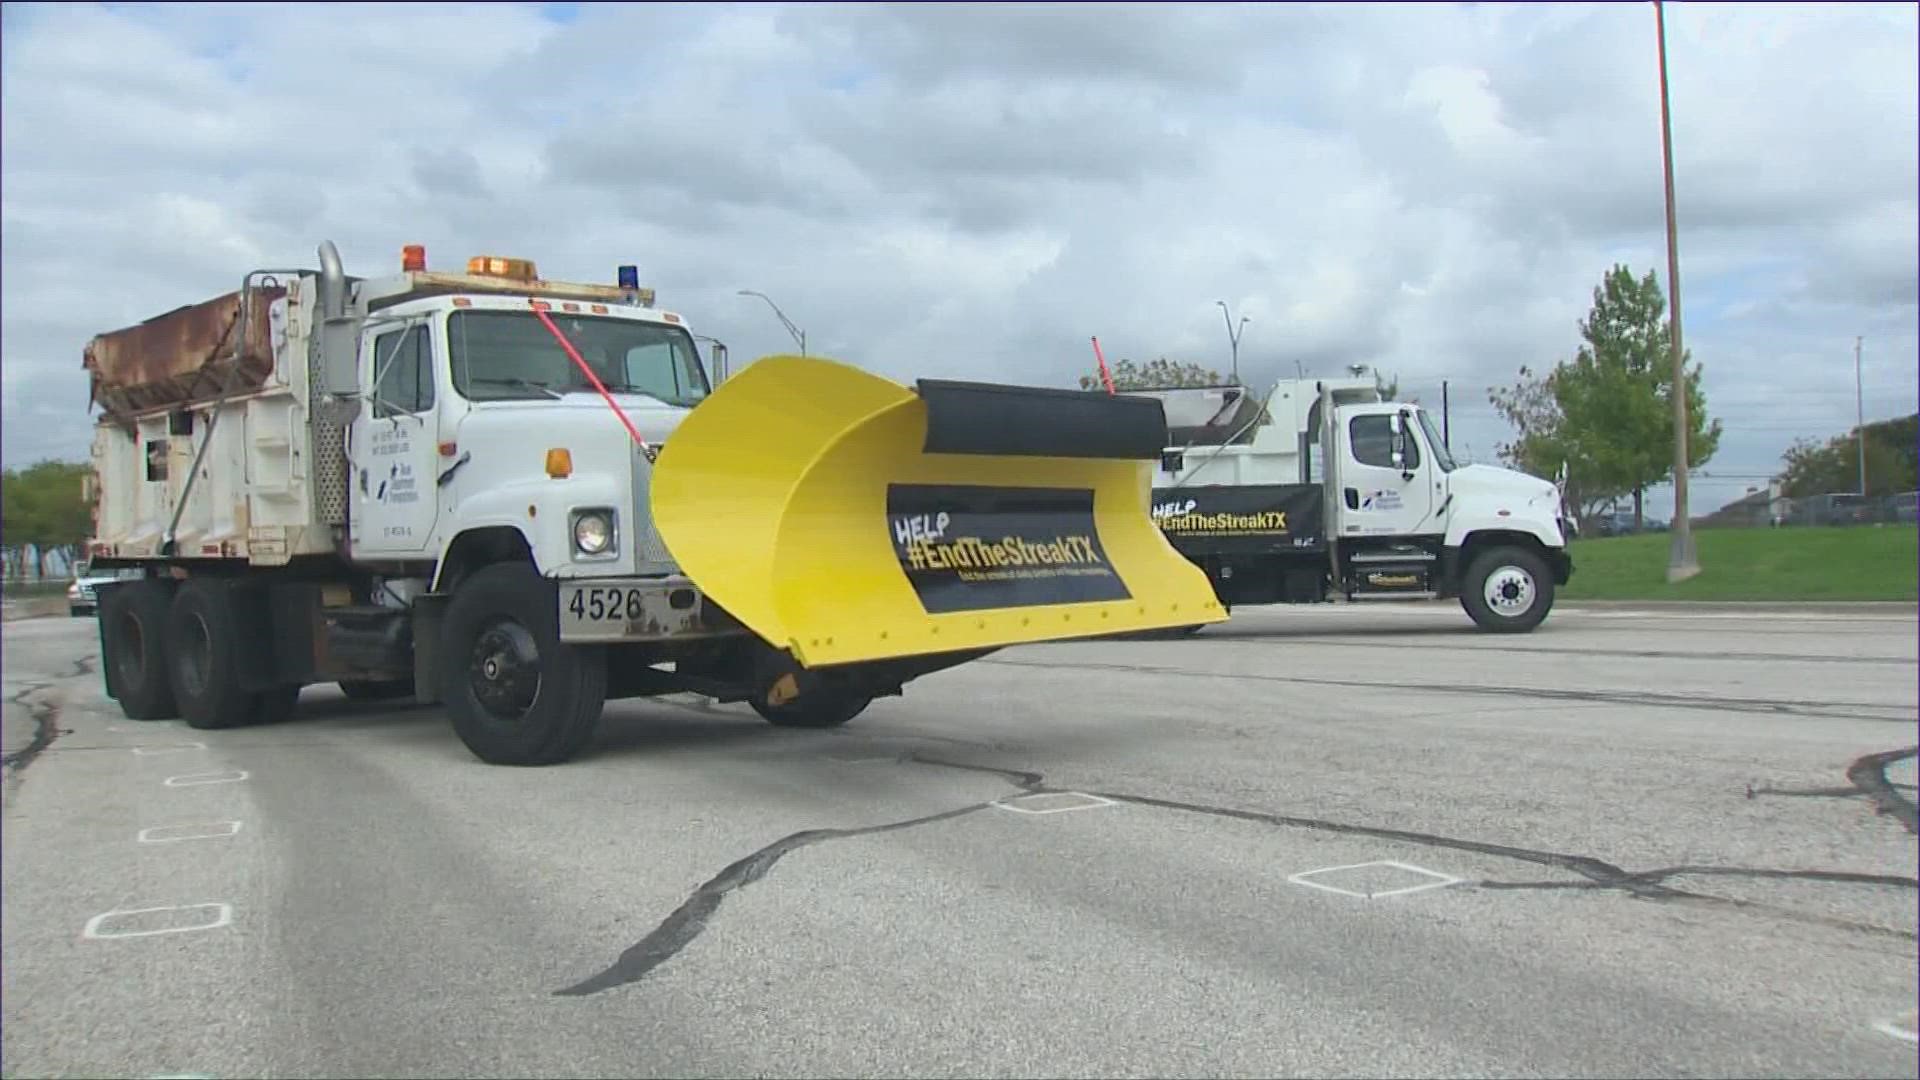 The plows were brought to Central Texas, refurbished and prepared for snow weather.